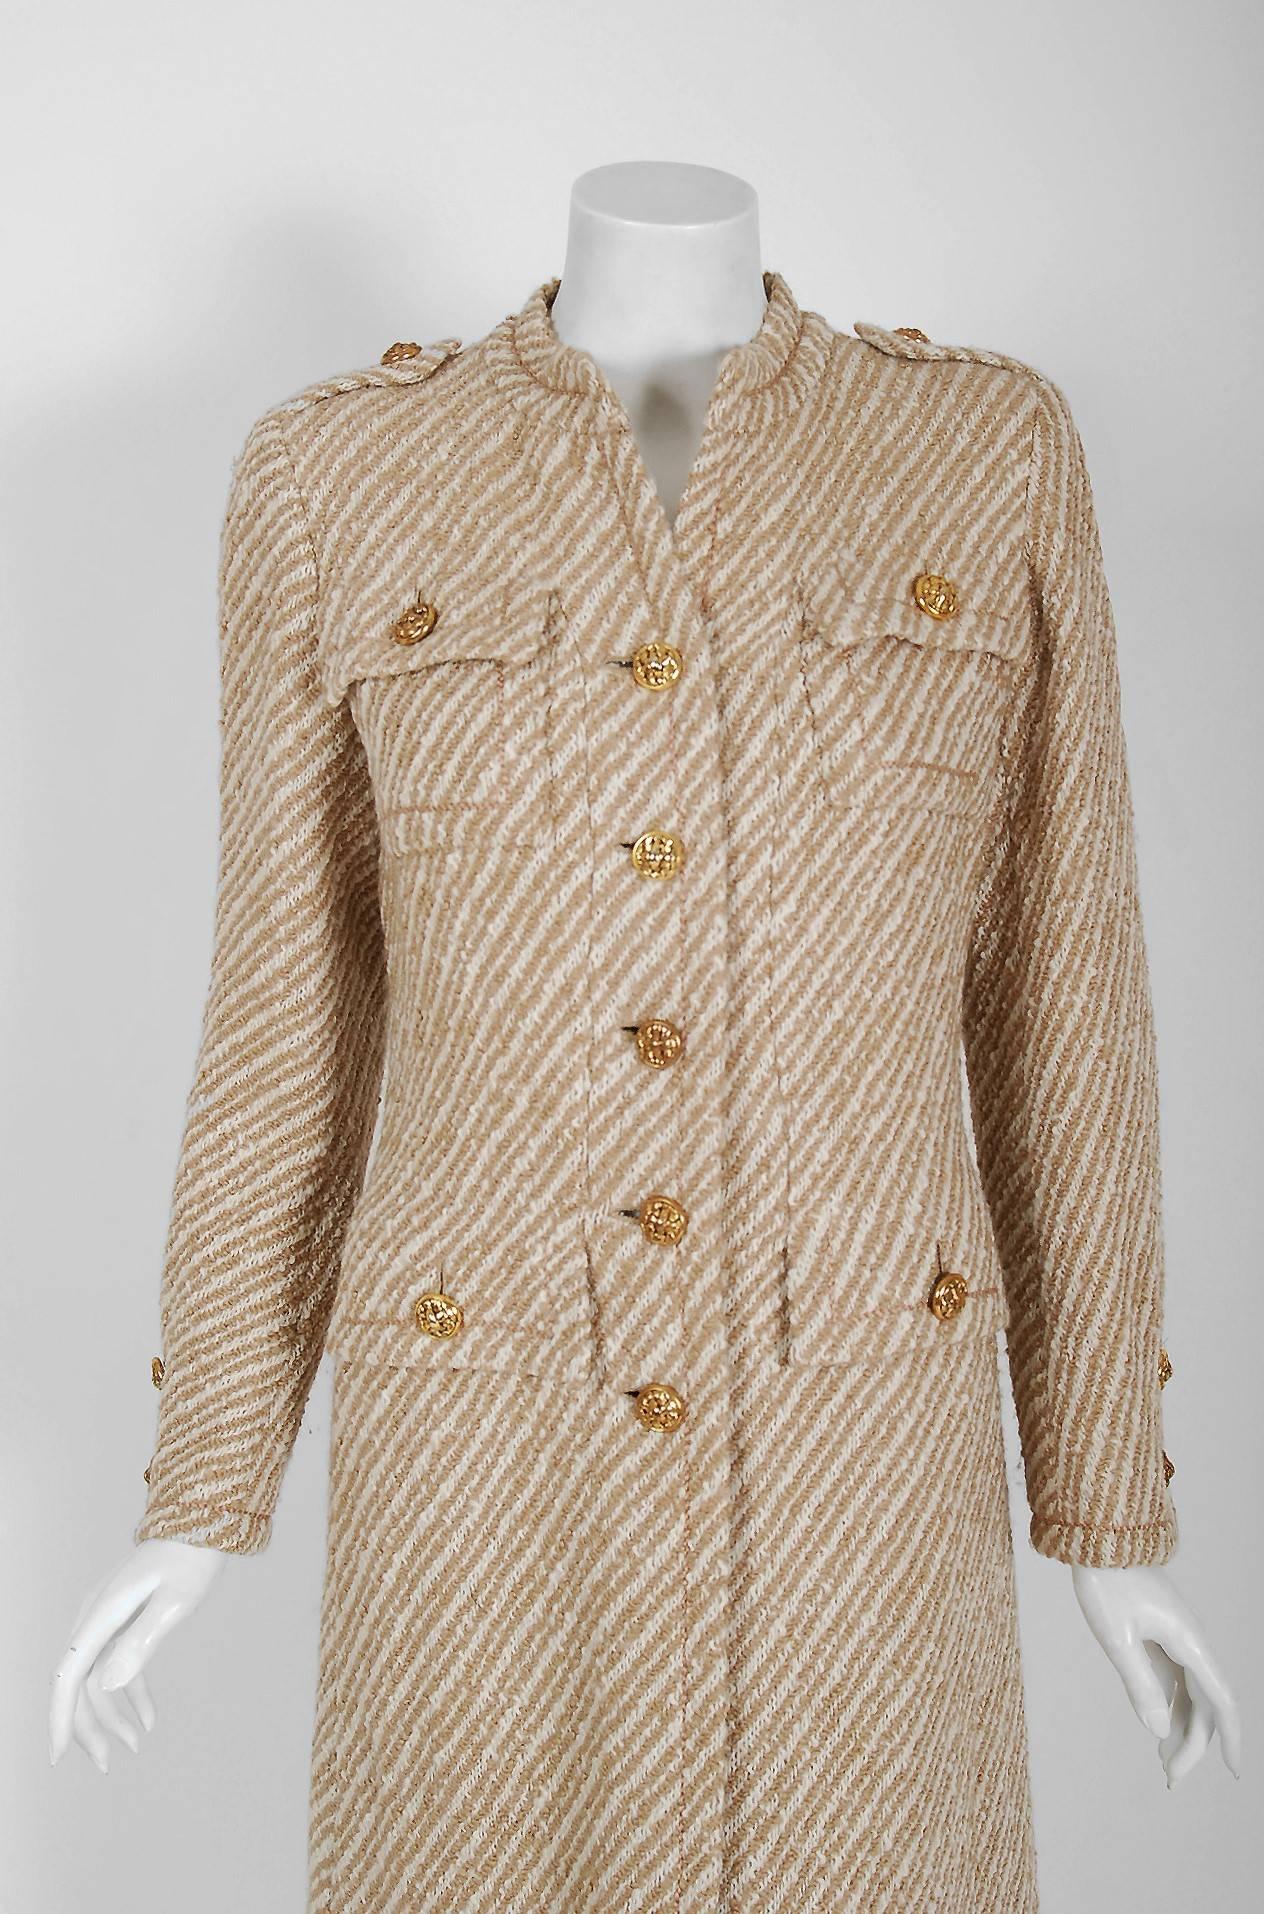 Chanel is known to be one of the most luxurious and decadent fashion houses in the world. This breathtaking ivory and beige striped wool coat from her 1972 Fall/Winter collection is a perfect example of why this couture brand has stood the test of